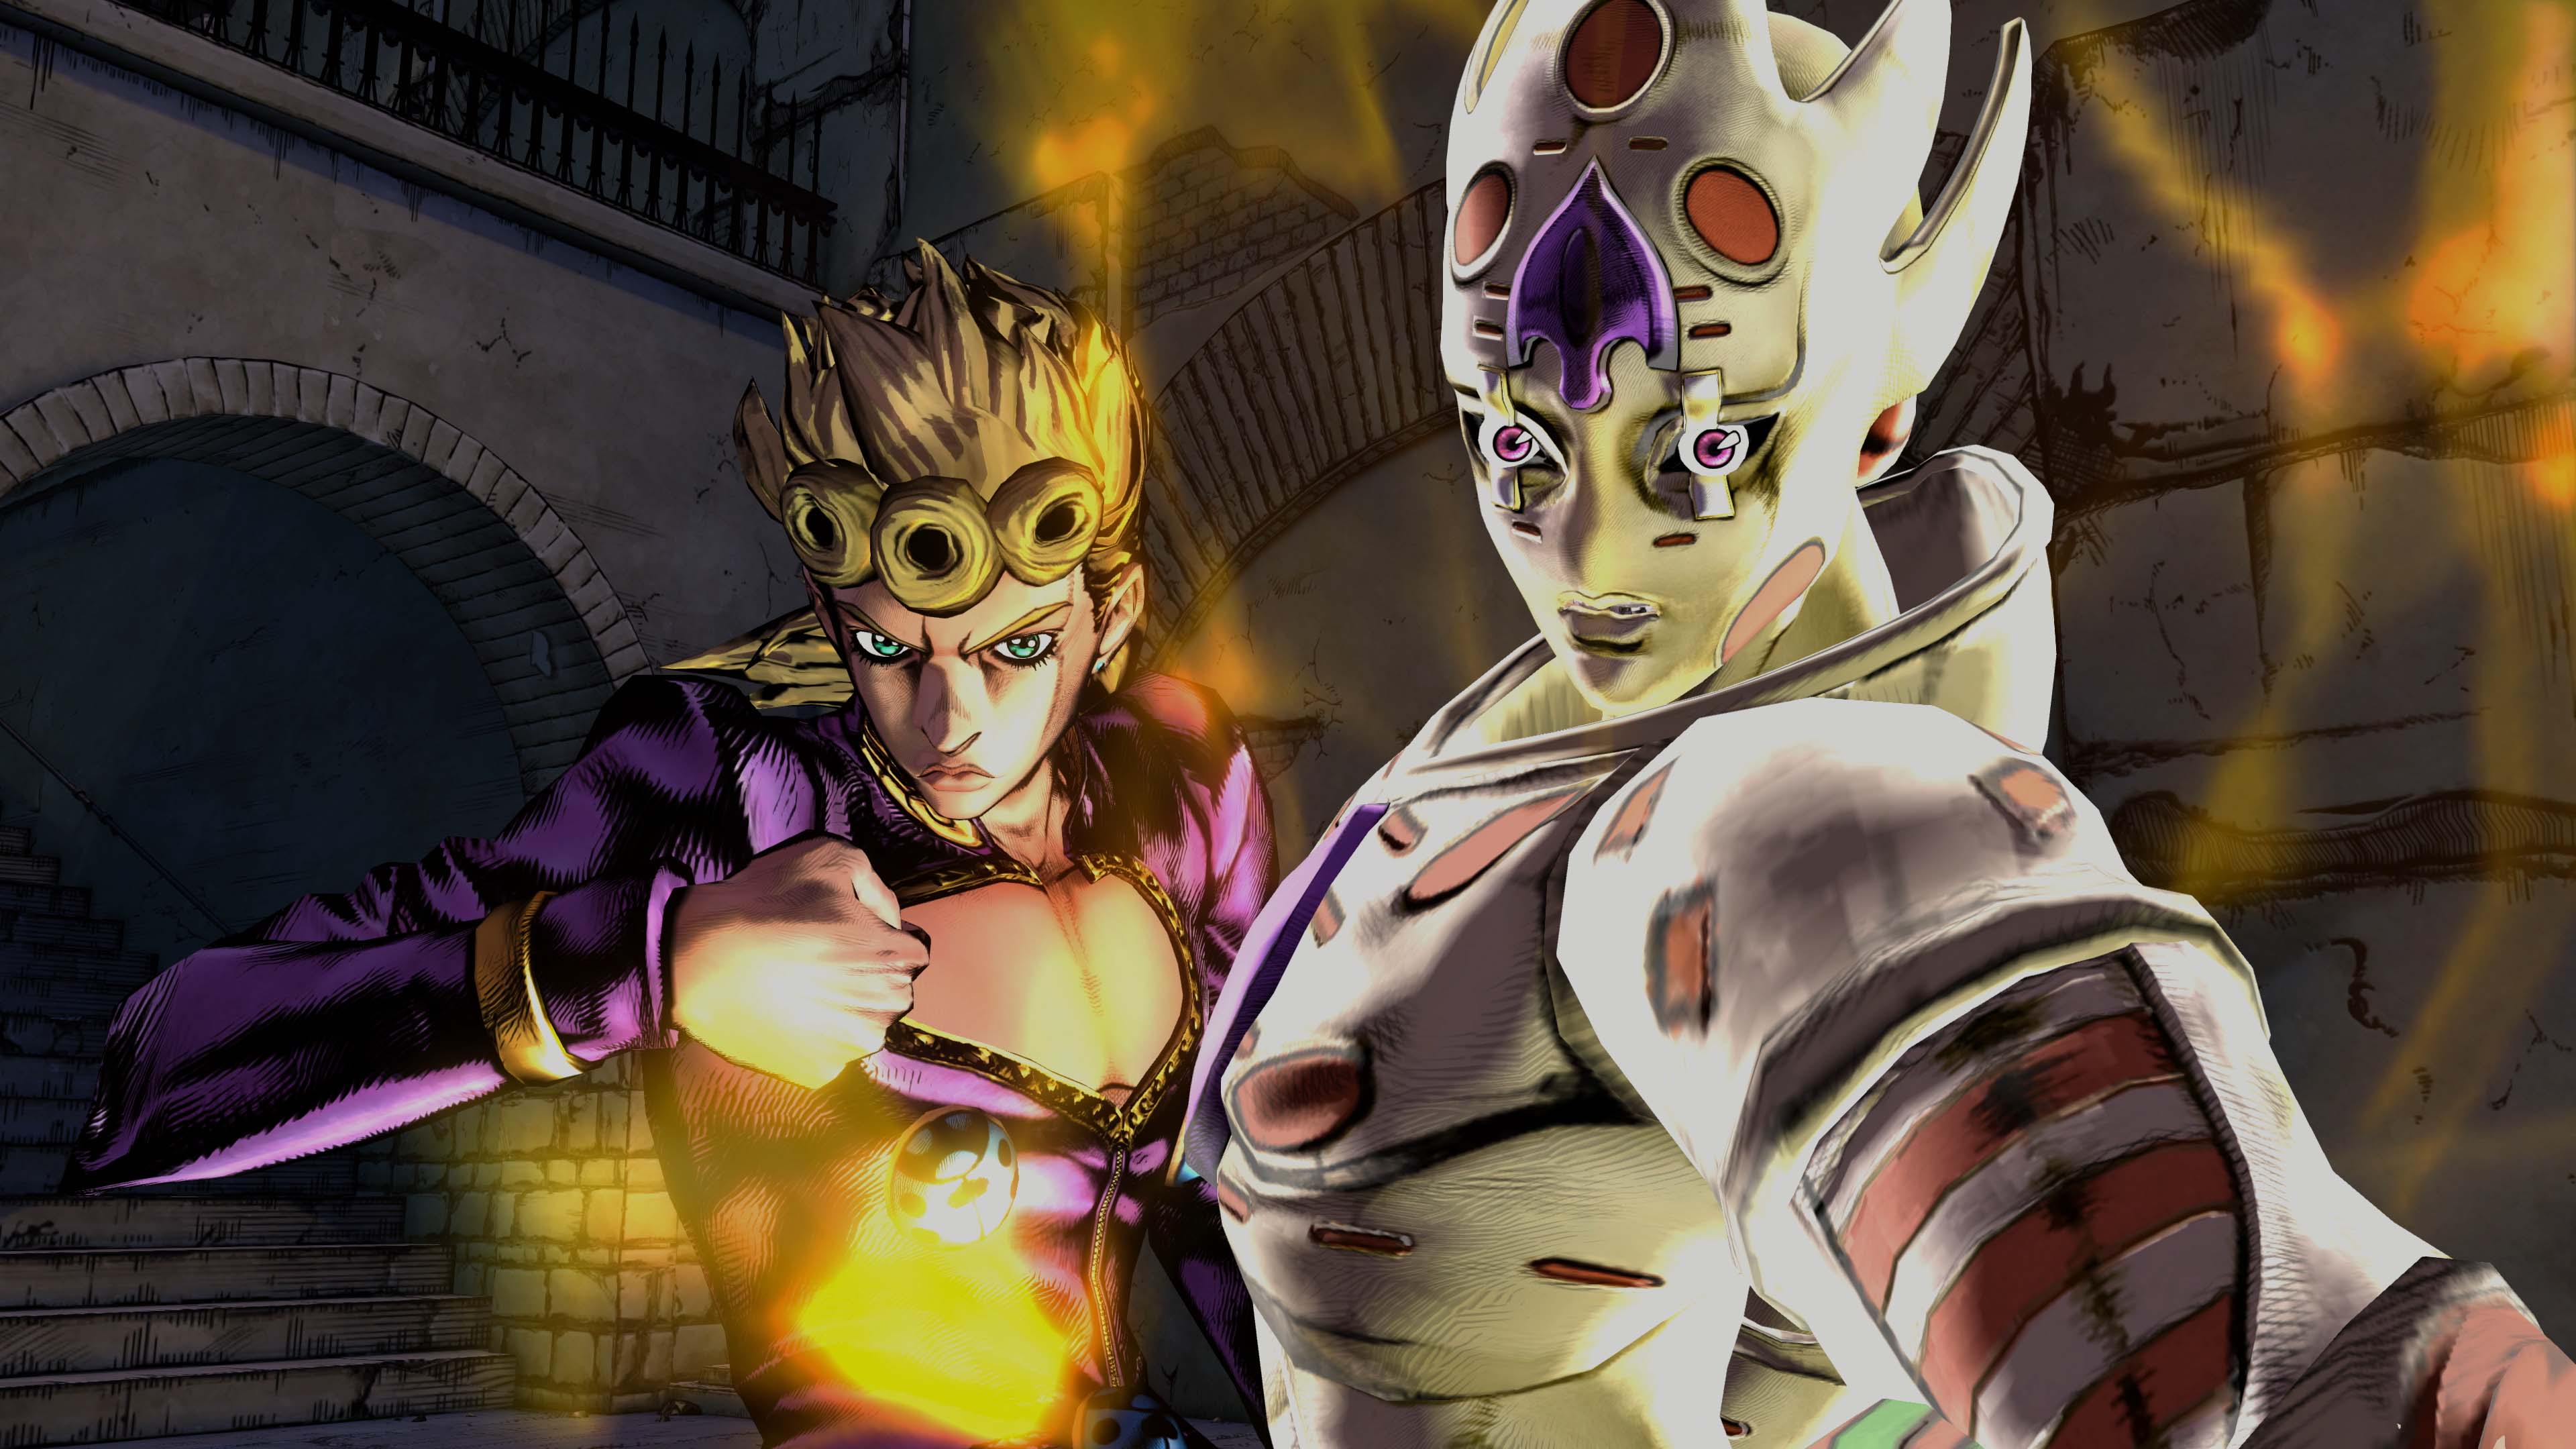  JOJO'S BIZARRE ADVENTURE: EYES OF HEAVEN (English Subs) for  PlayStation 4 [PS4] : Video Games